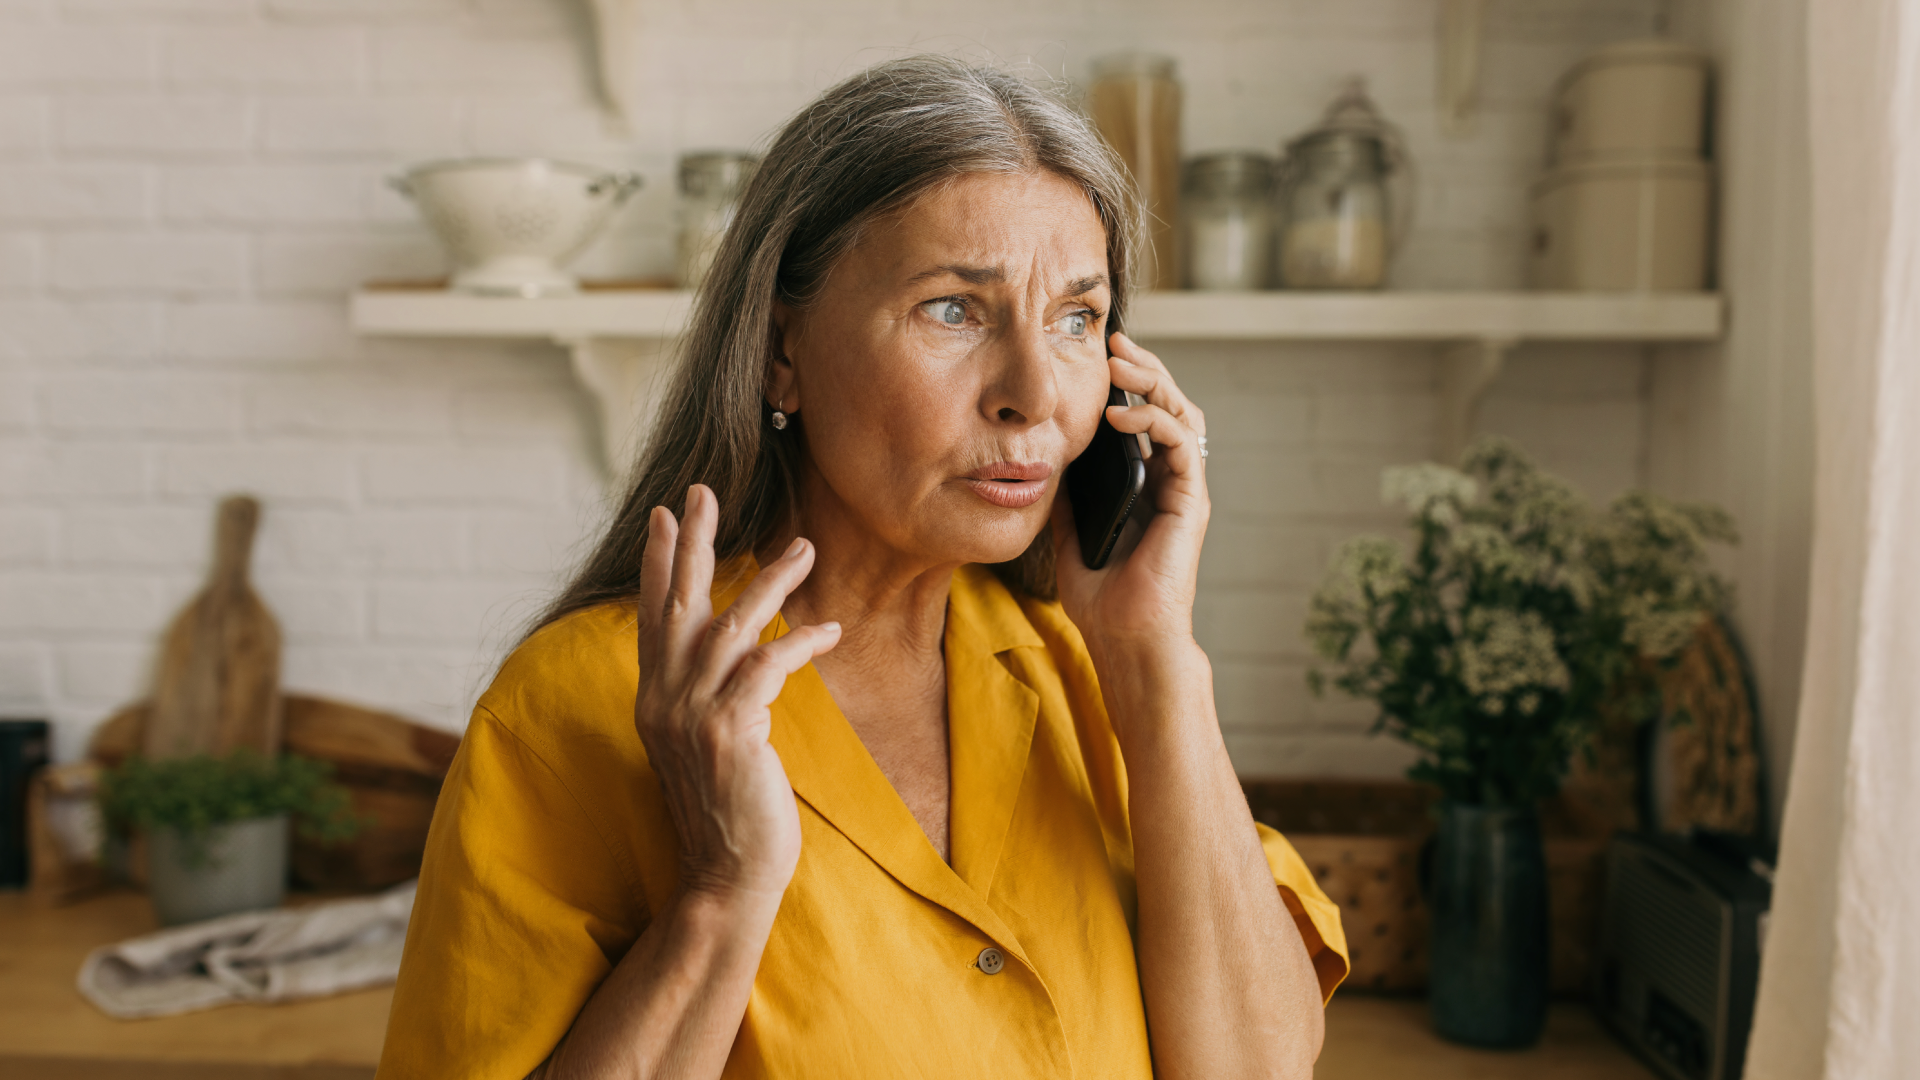 Woman speaking to a scammer on the phone.